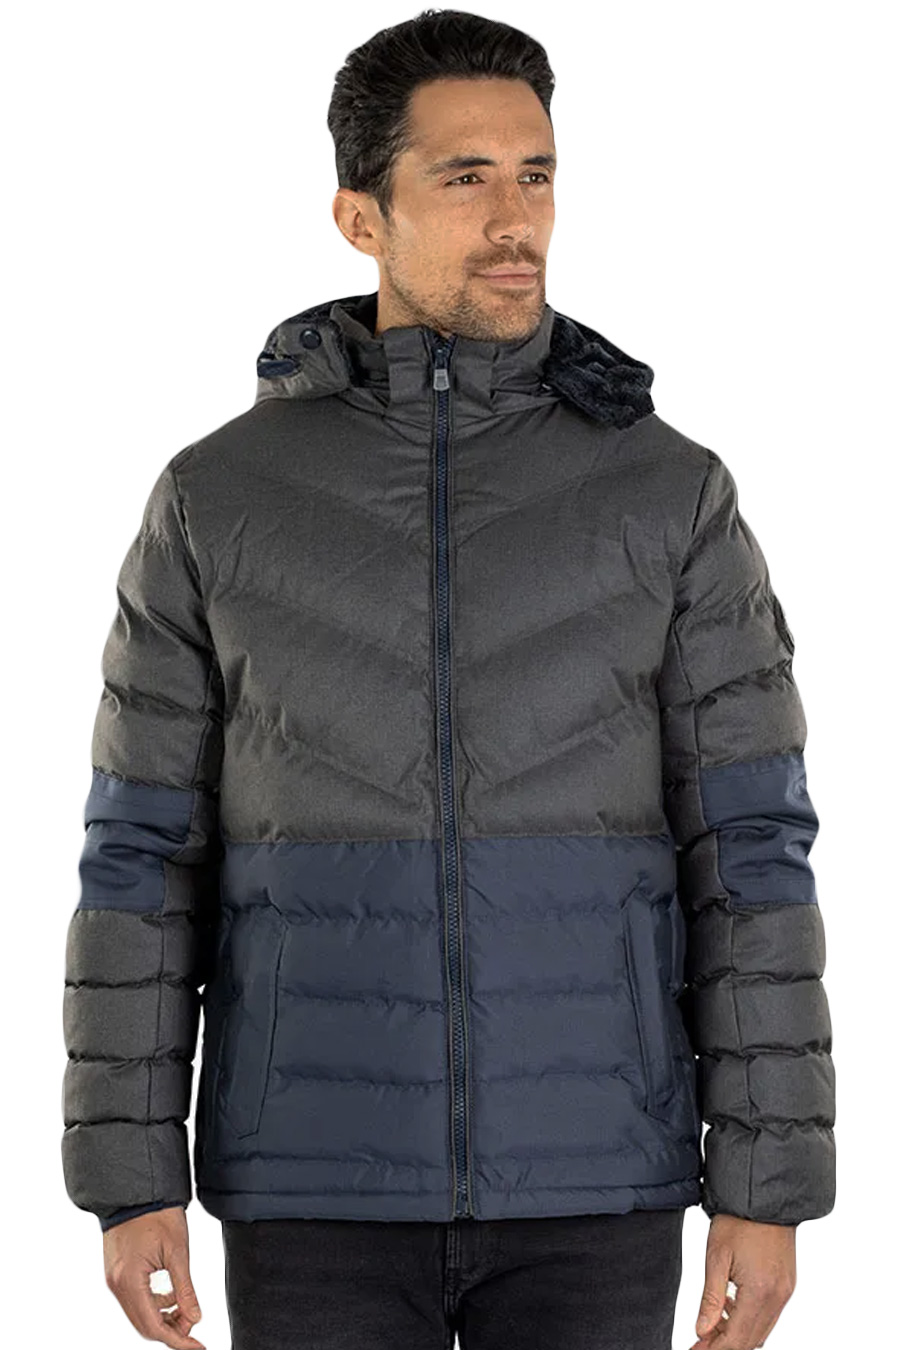 Winter jacket GEOGRAPHICAL NORWAY BALLADE-NAVY